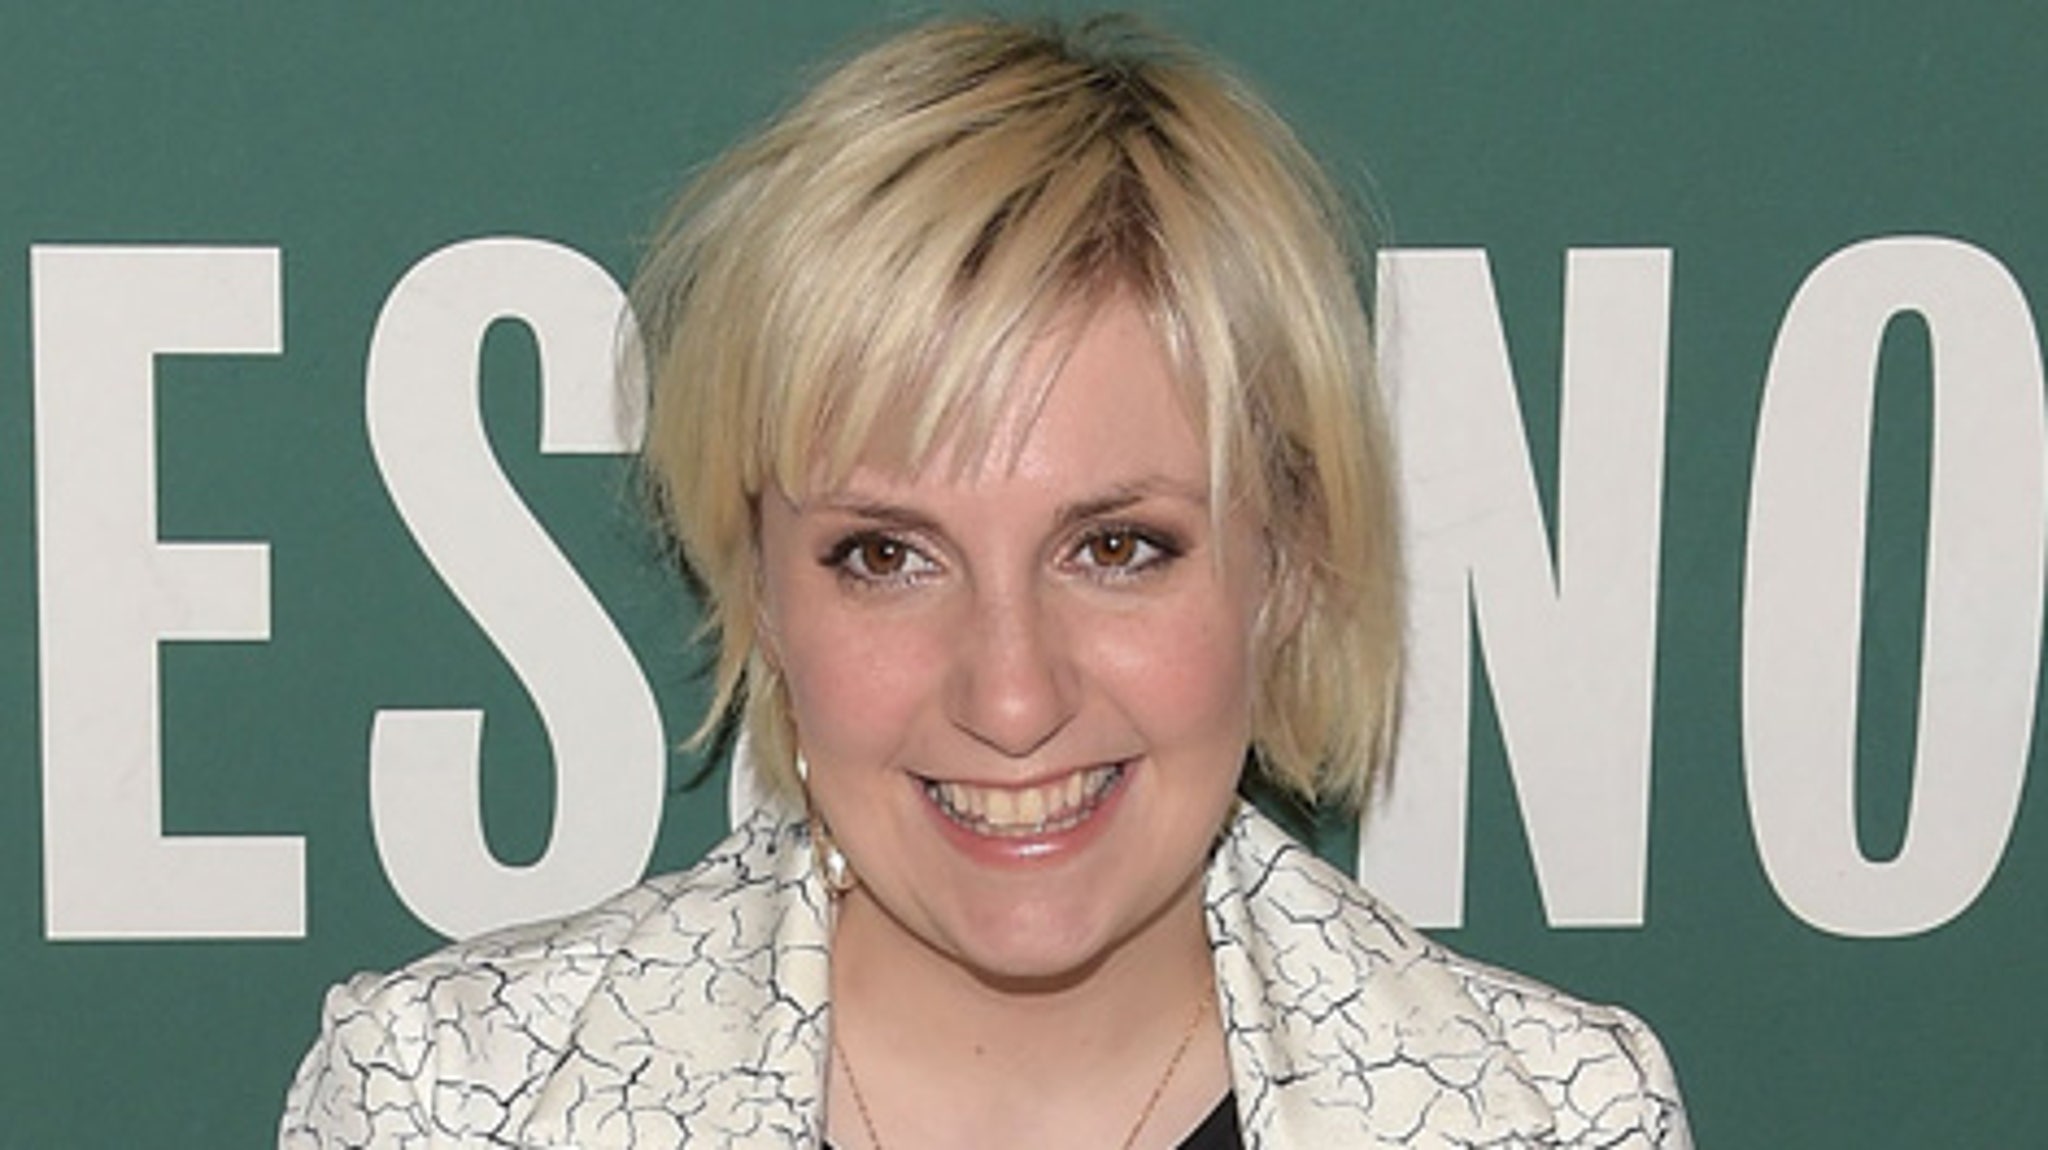 2. Lena Dunham Dyes Her Hair Blue, Says She's 'Gotta Have Fun' With It - wide 9